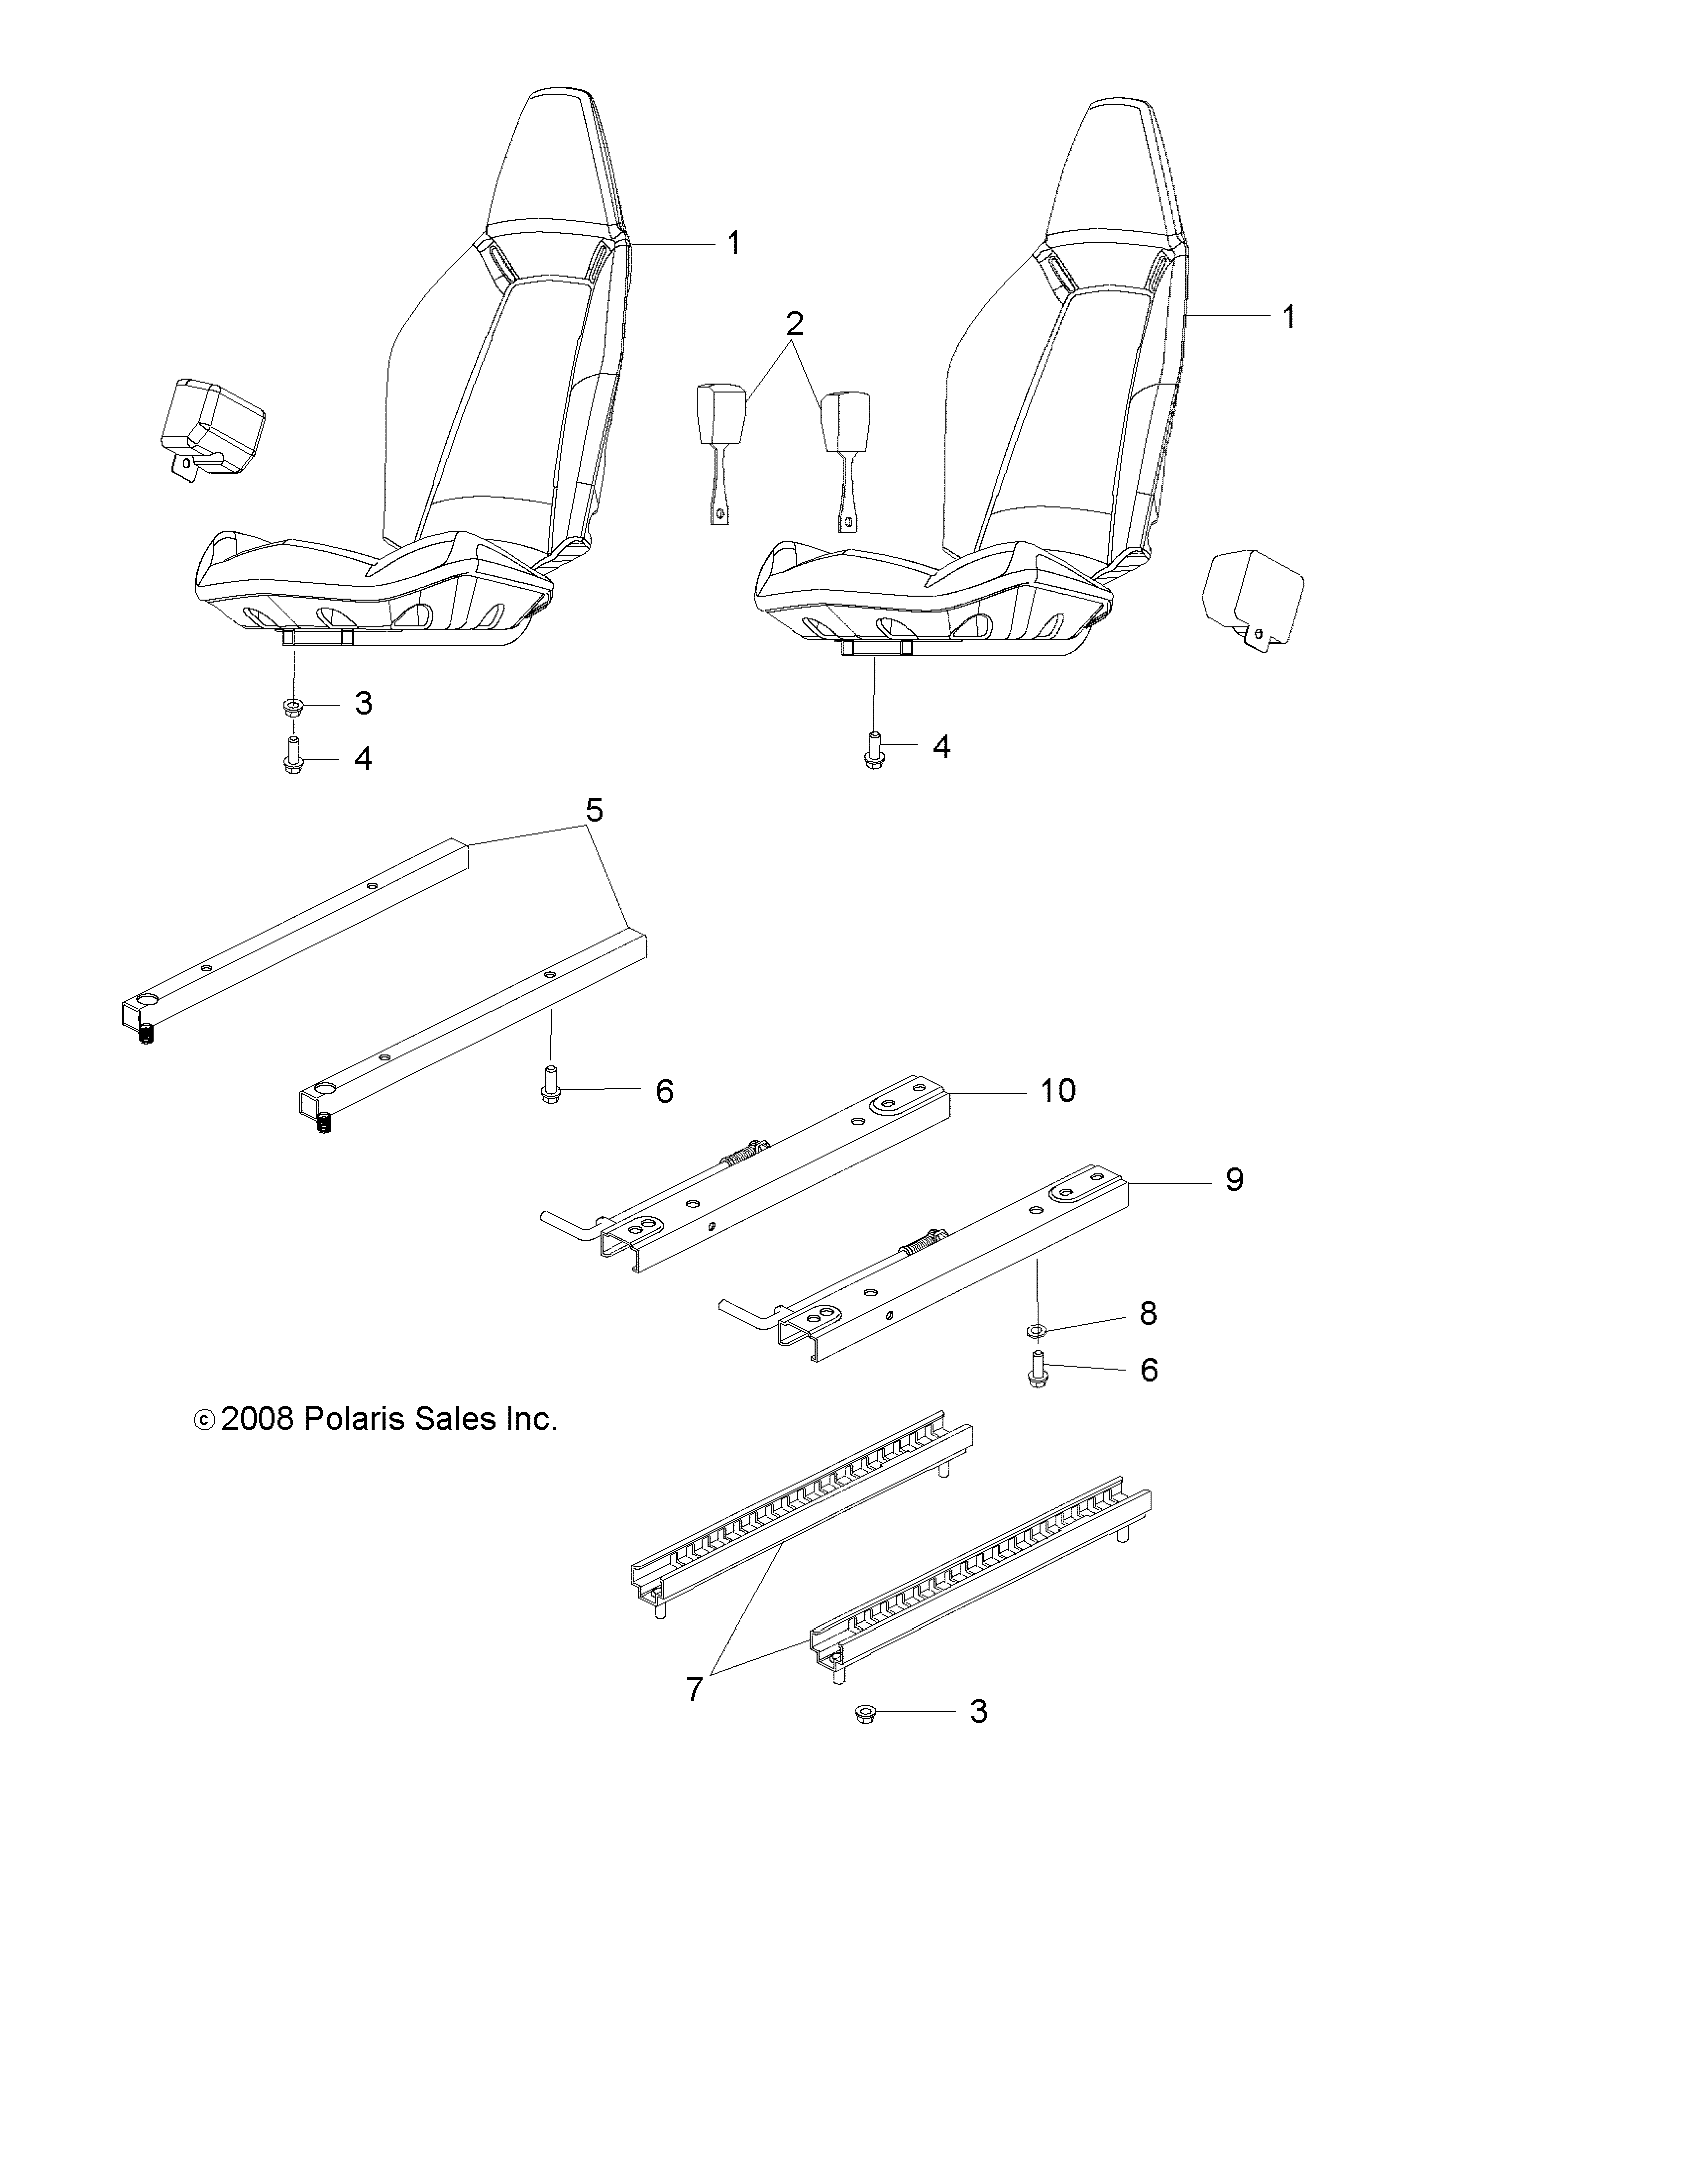 Part Number : 0454388 GUIDE-SEAT UPPER RH W/O LEVER